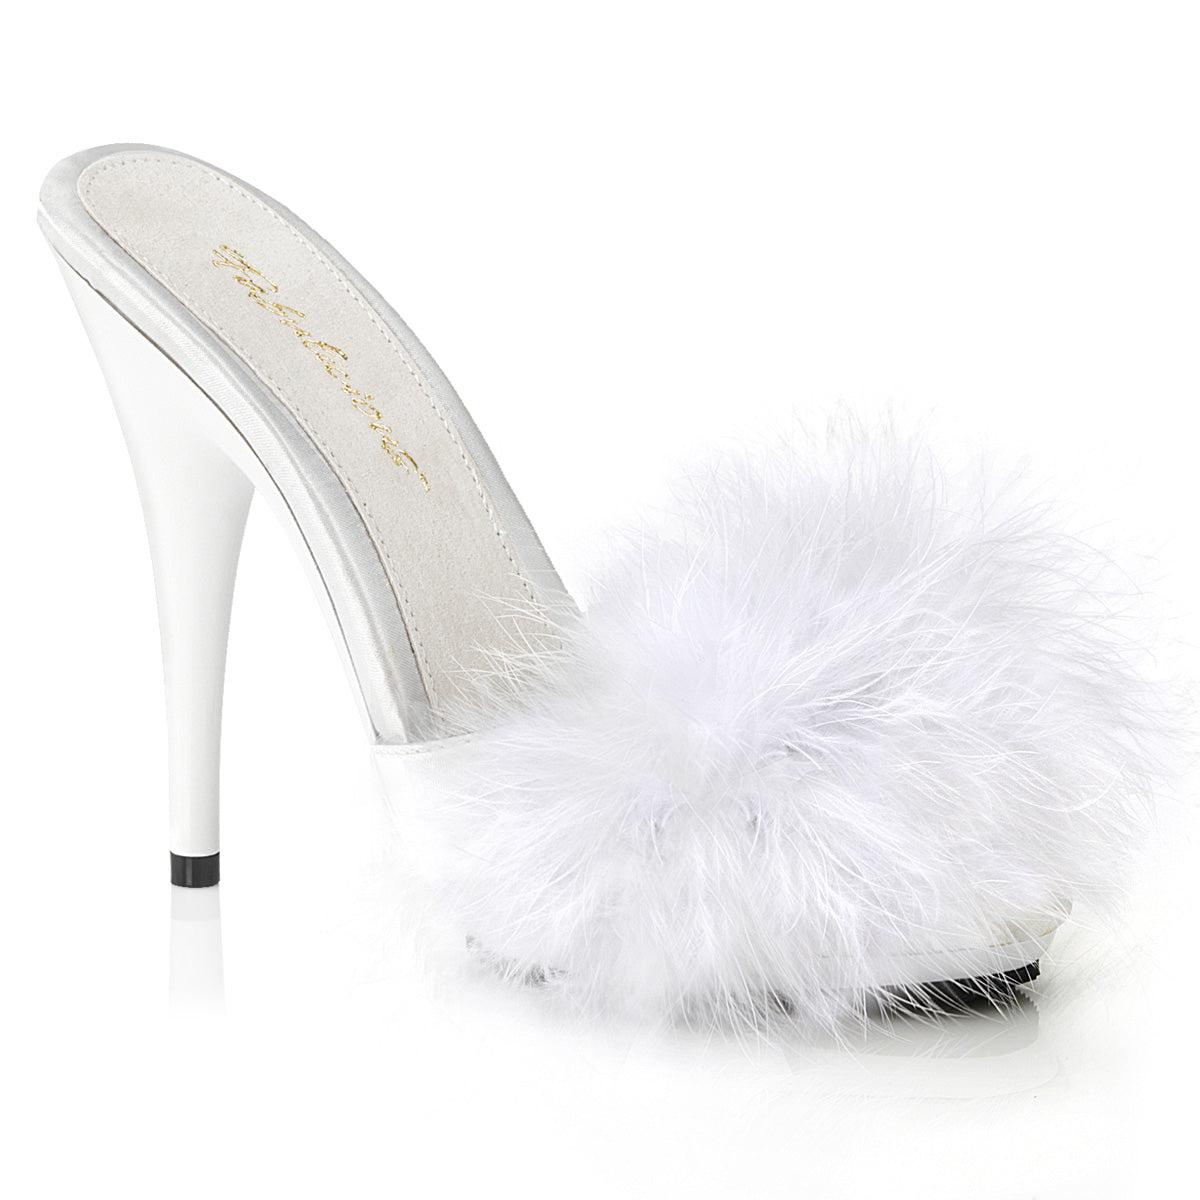 POISE-501F Fabulicious 5 Inch Heel White Satin Fur Sexy Shoe-Fabulicious- Sexy Shoes